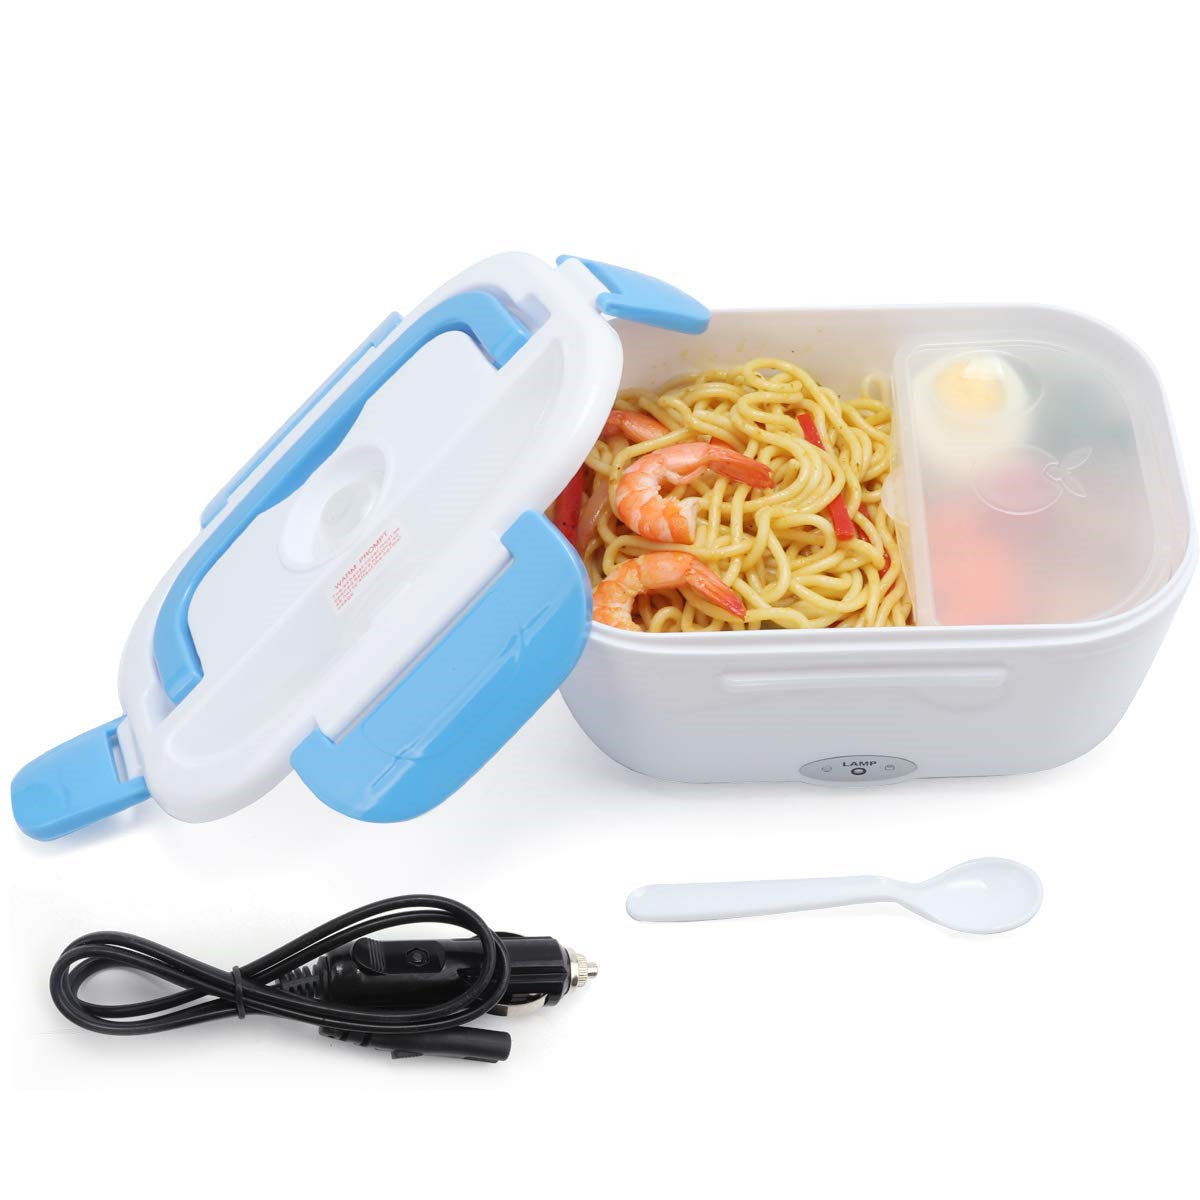 Portable 1.5L Blue Lunch Box 12V Car Electric Food Warmer Hot Rice Cooker Heater